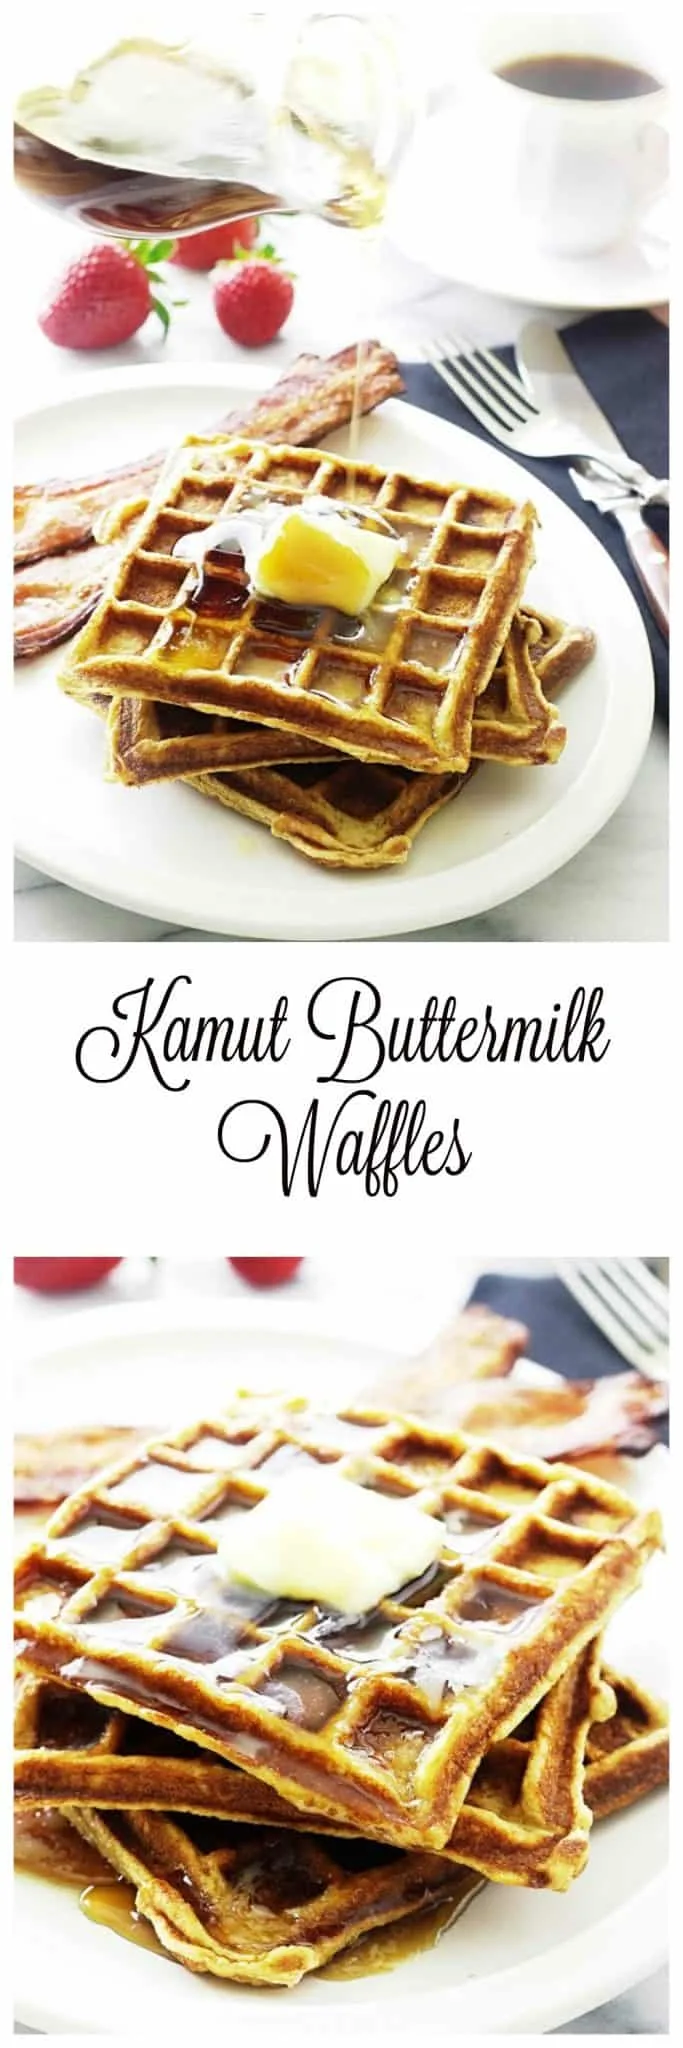 buttermilk waffles are made with stone ground kamut flour, whole grain oat flour and ground flax seed.